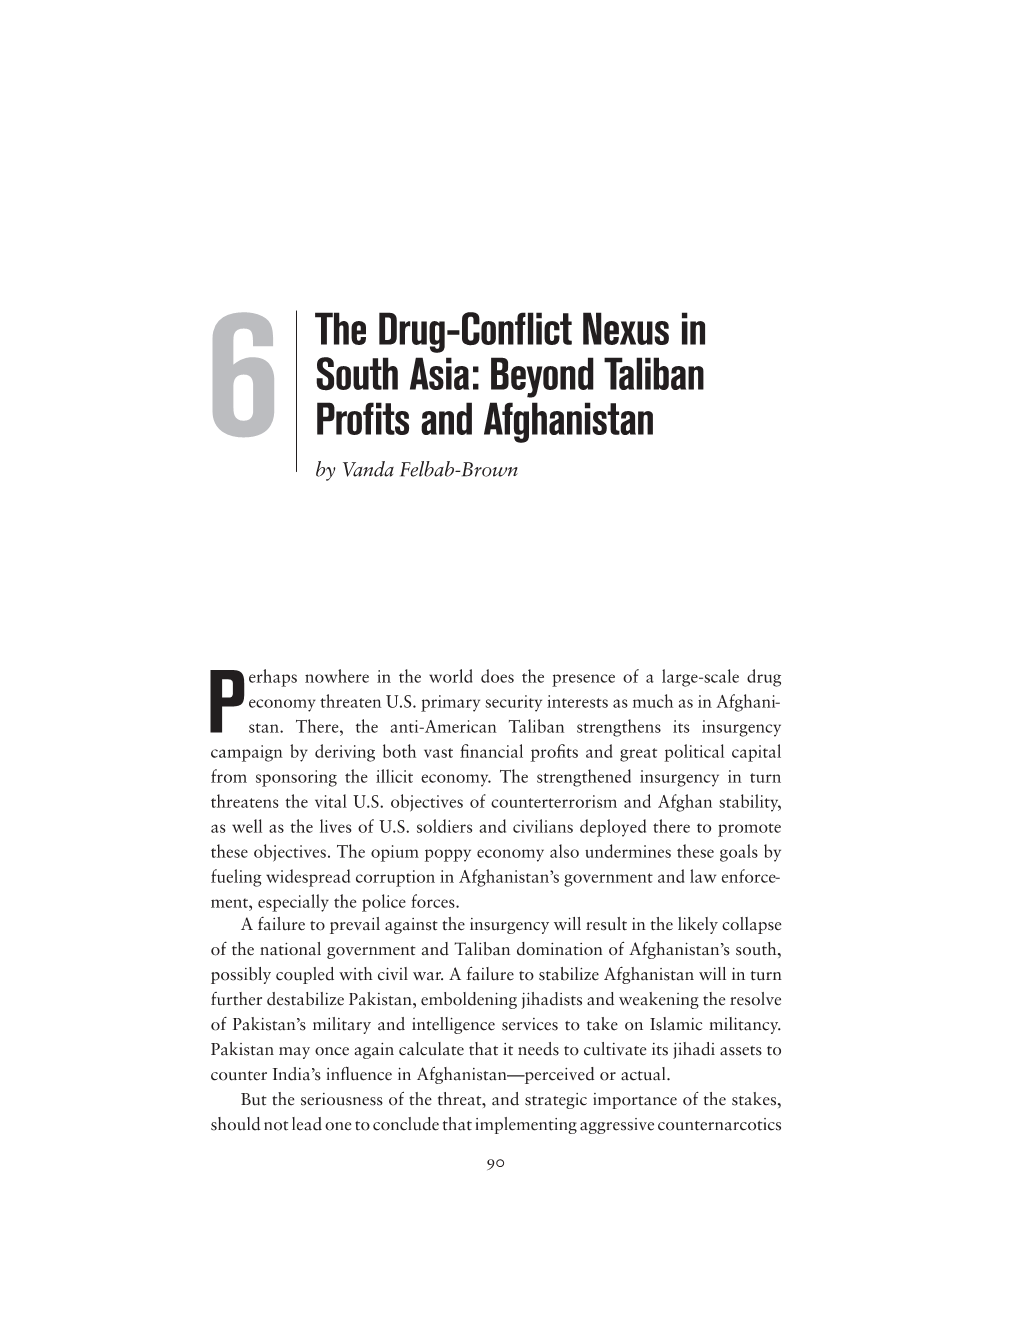 The Drug-Conflict Nexus in South Asia: Beyond Taliban Profits and Afghanistan